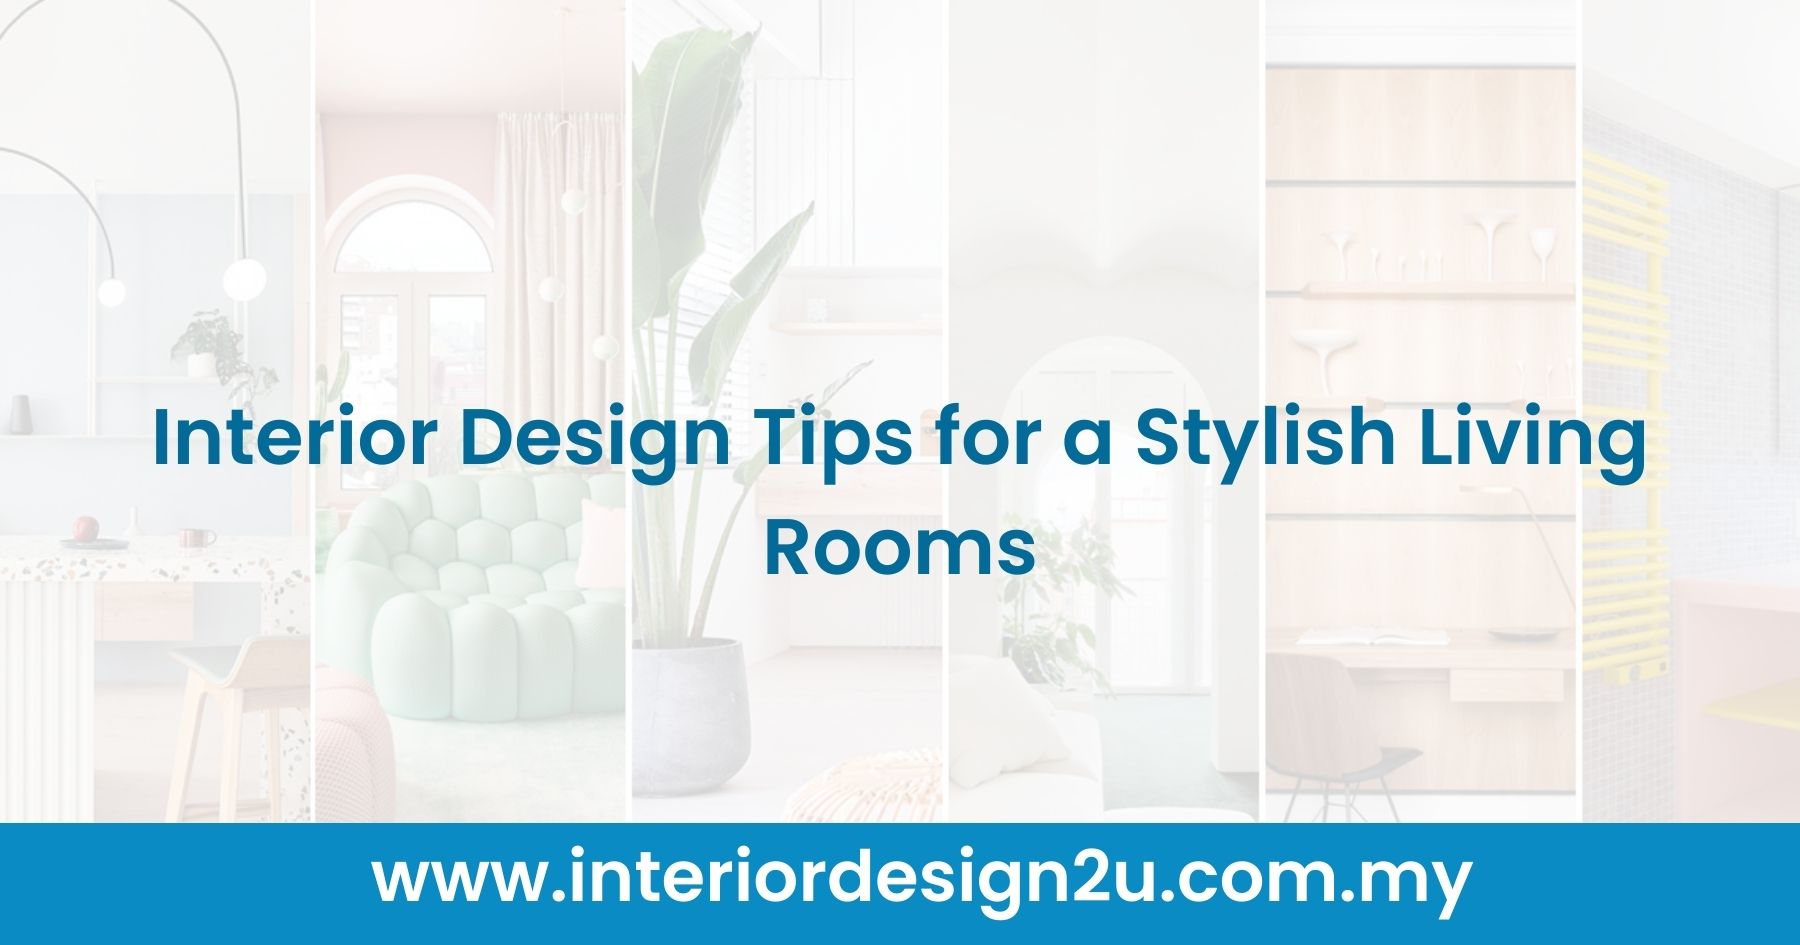 Interior Design Tips for a Stylish Living Rooms